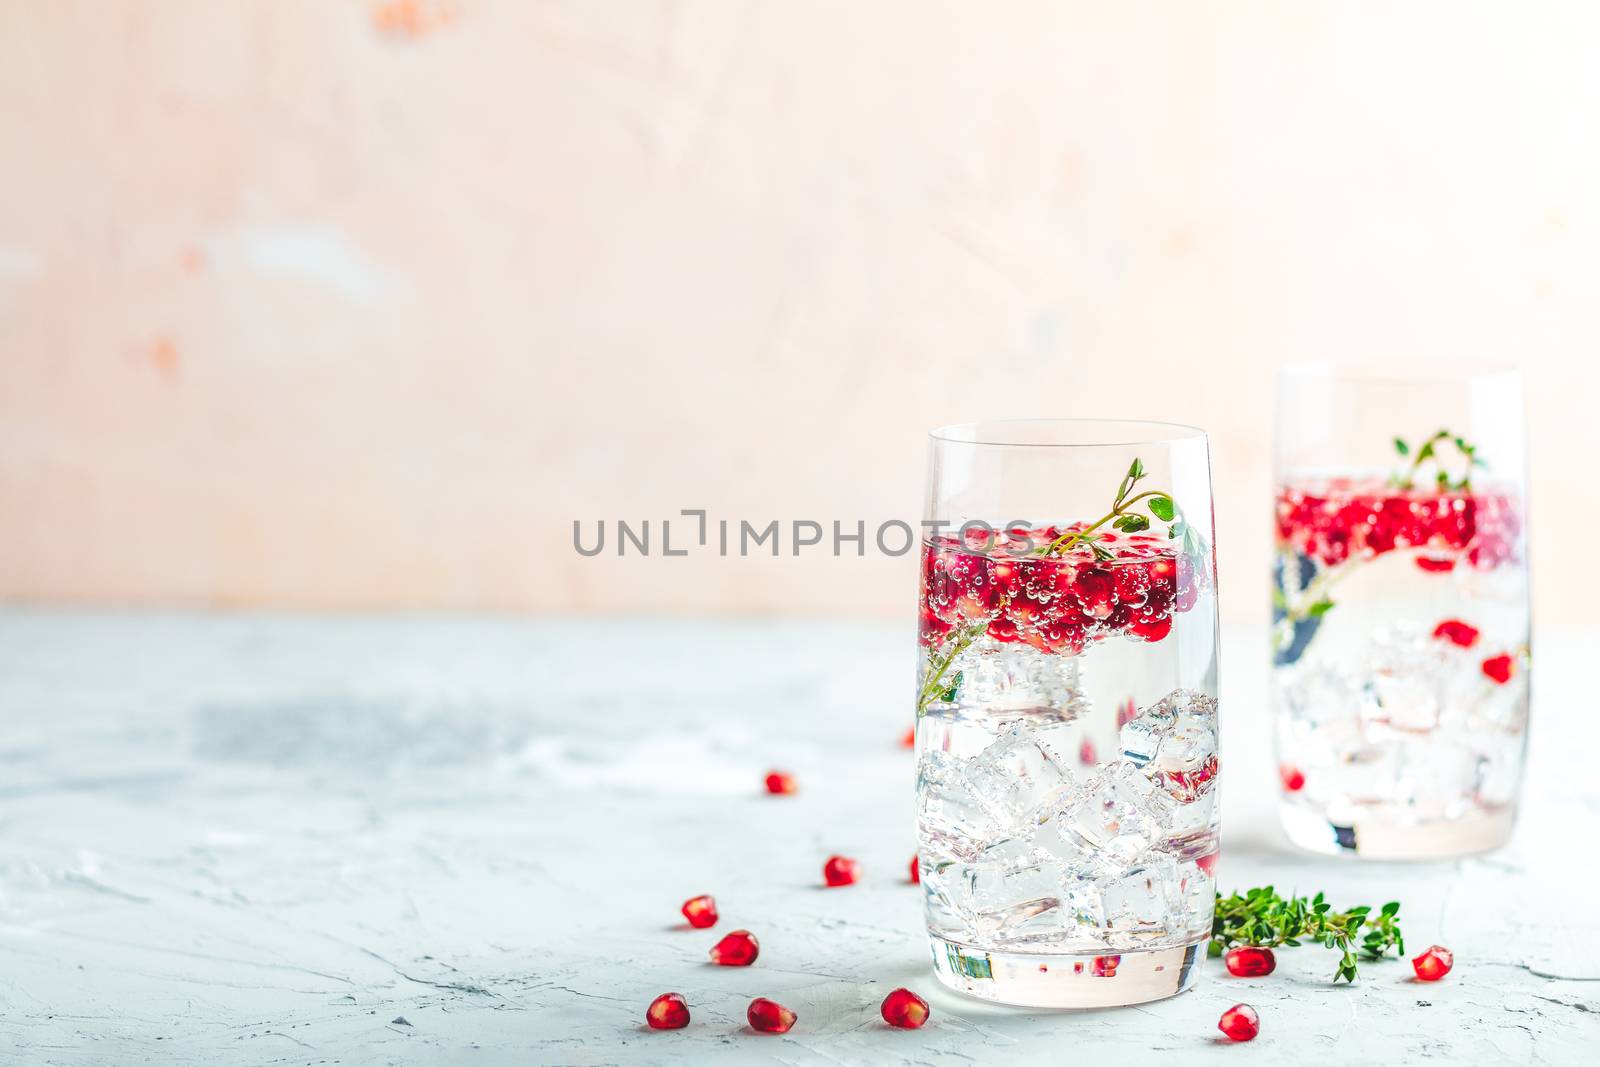 Festive drinks, gin and tonic pomegranate cocktail or detox water with ice. Selective focus, copy space for text, light gray concrete table surface.